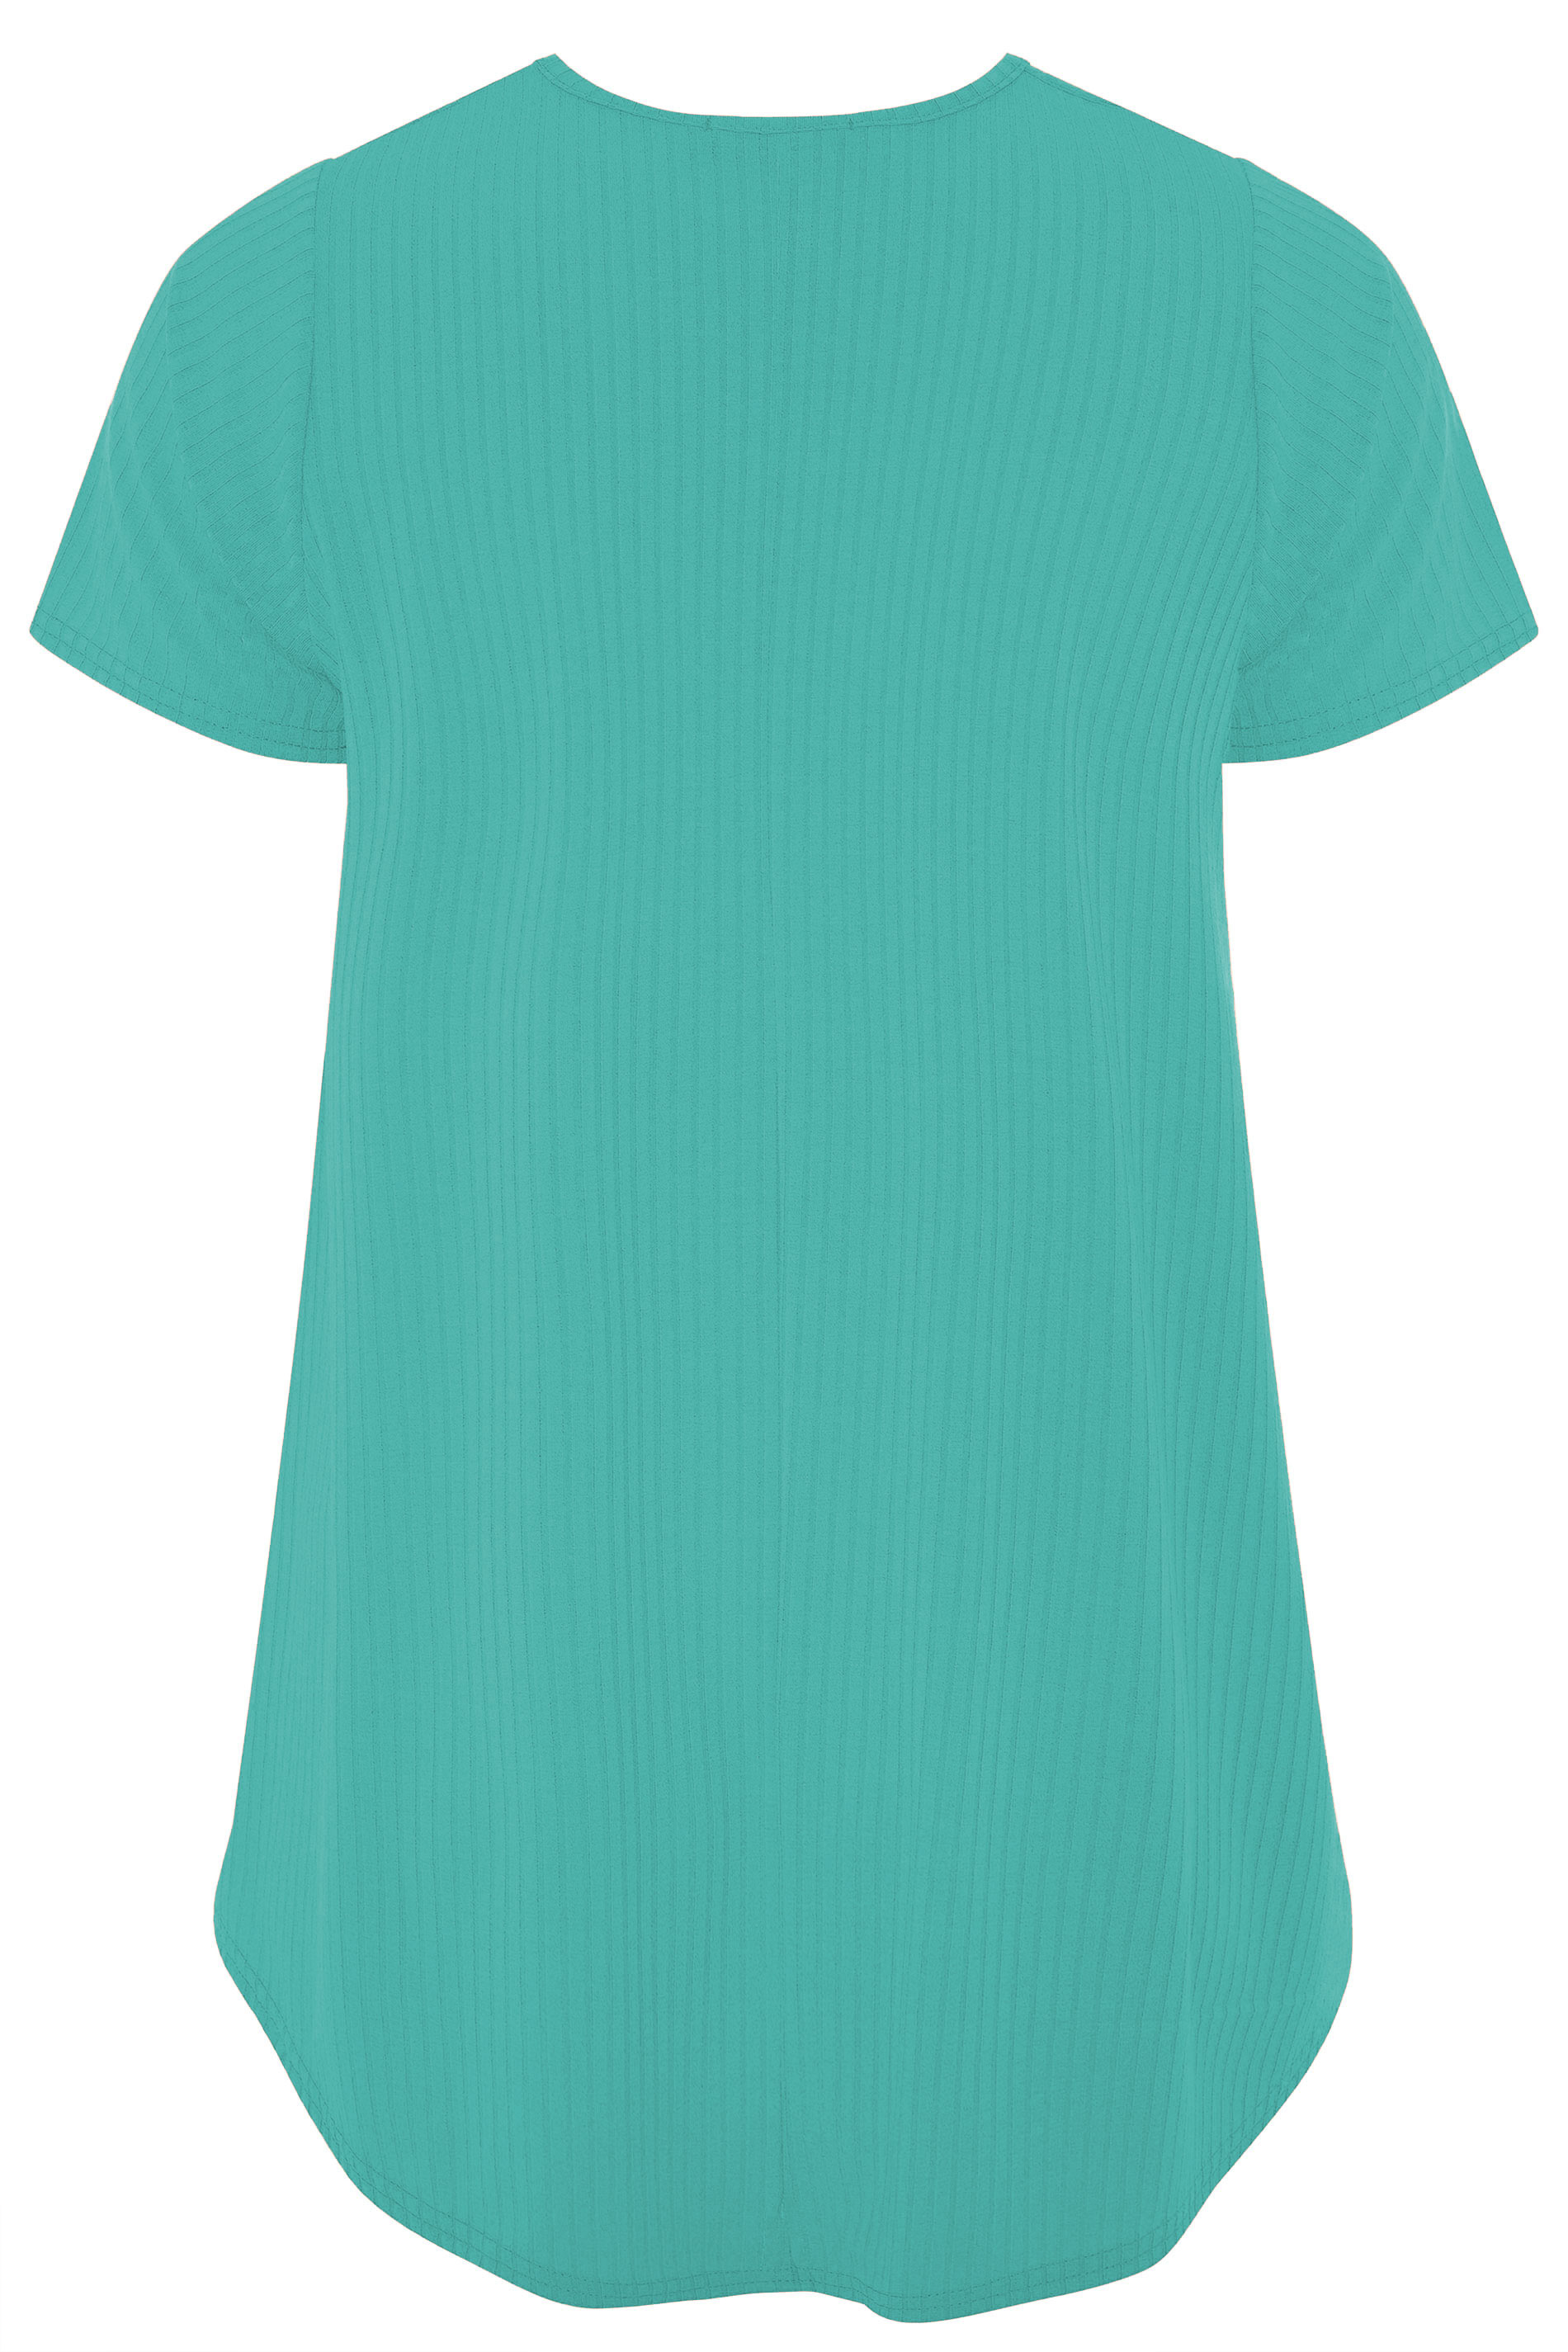 Grande taille  Tops Grande taille  Tops Jersey | LIMITED COLLECTION - T-Shirt Vert Nervuré en Jersey - DB84023